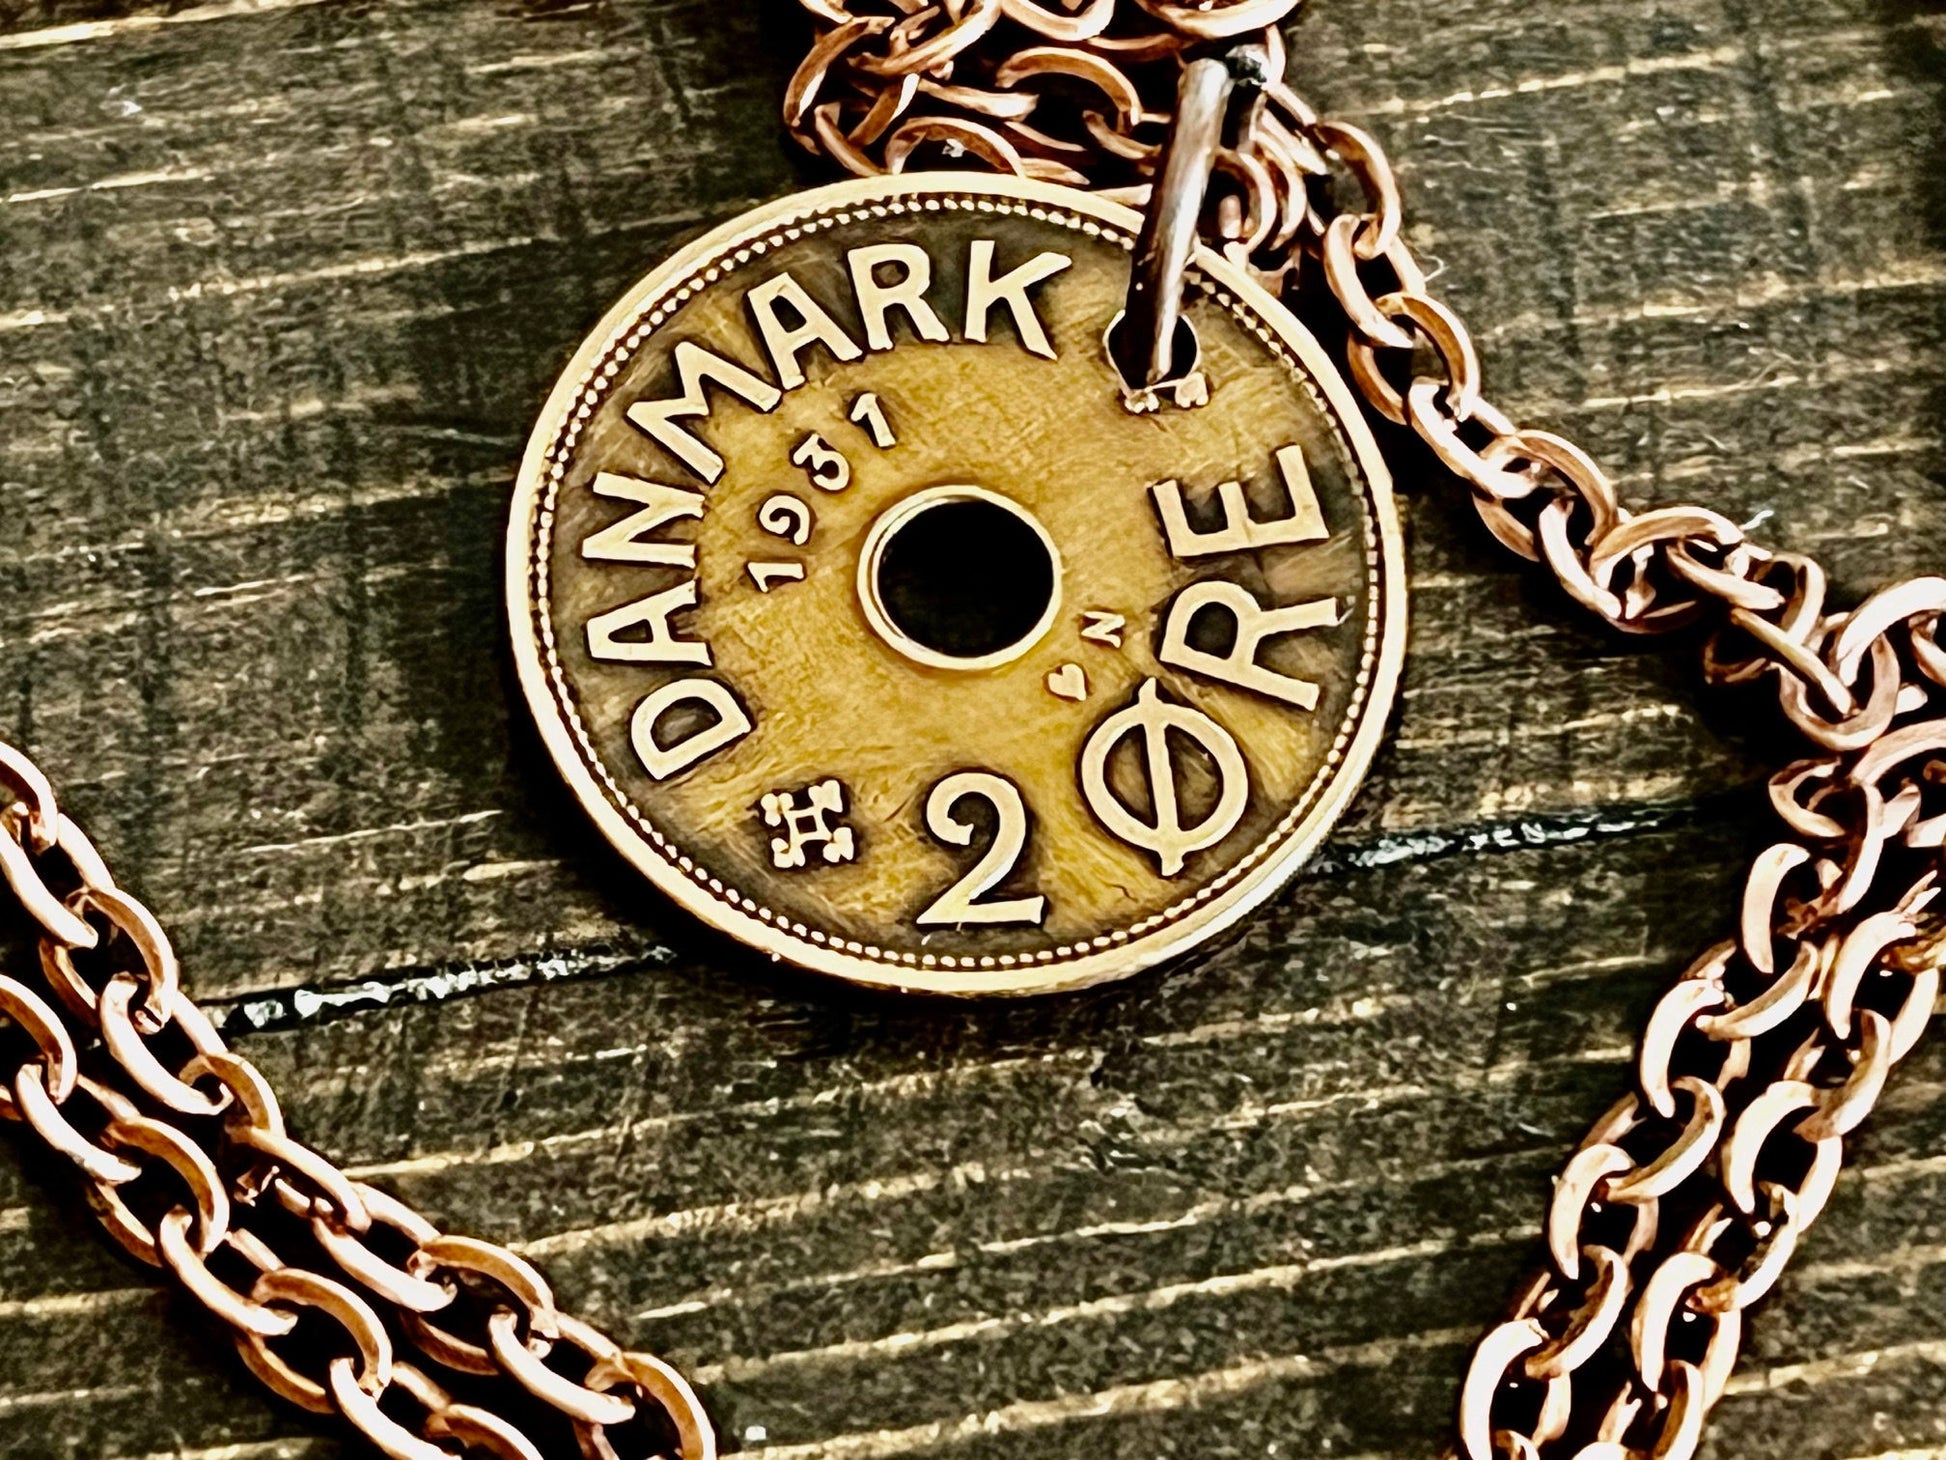 Denmark Coin Pendant 2 Ore Danmark Personal Necklace Old Vintage Handmade Jewelry Gift Friend Charm For Him Her World Coin Collector